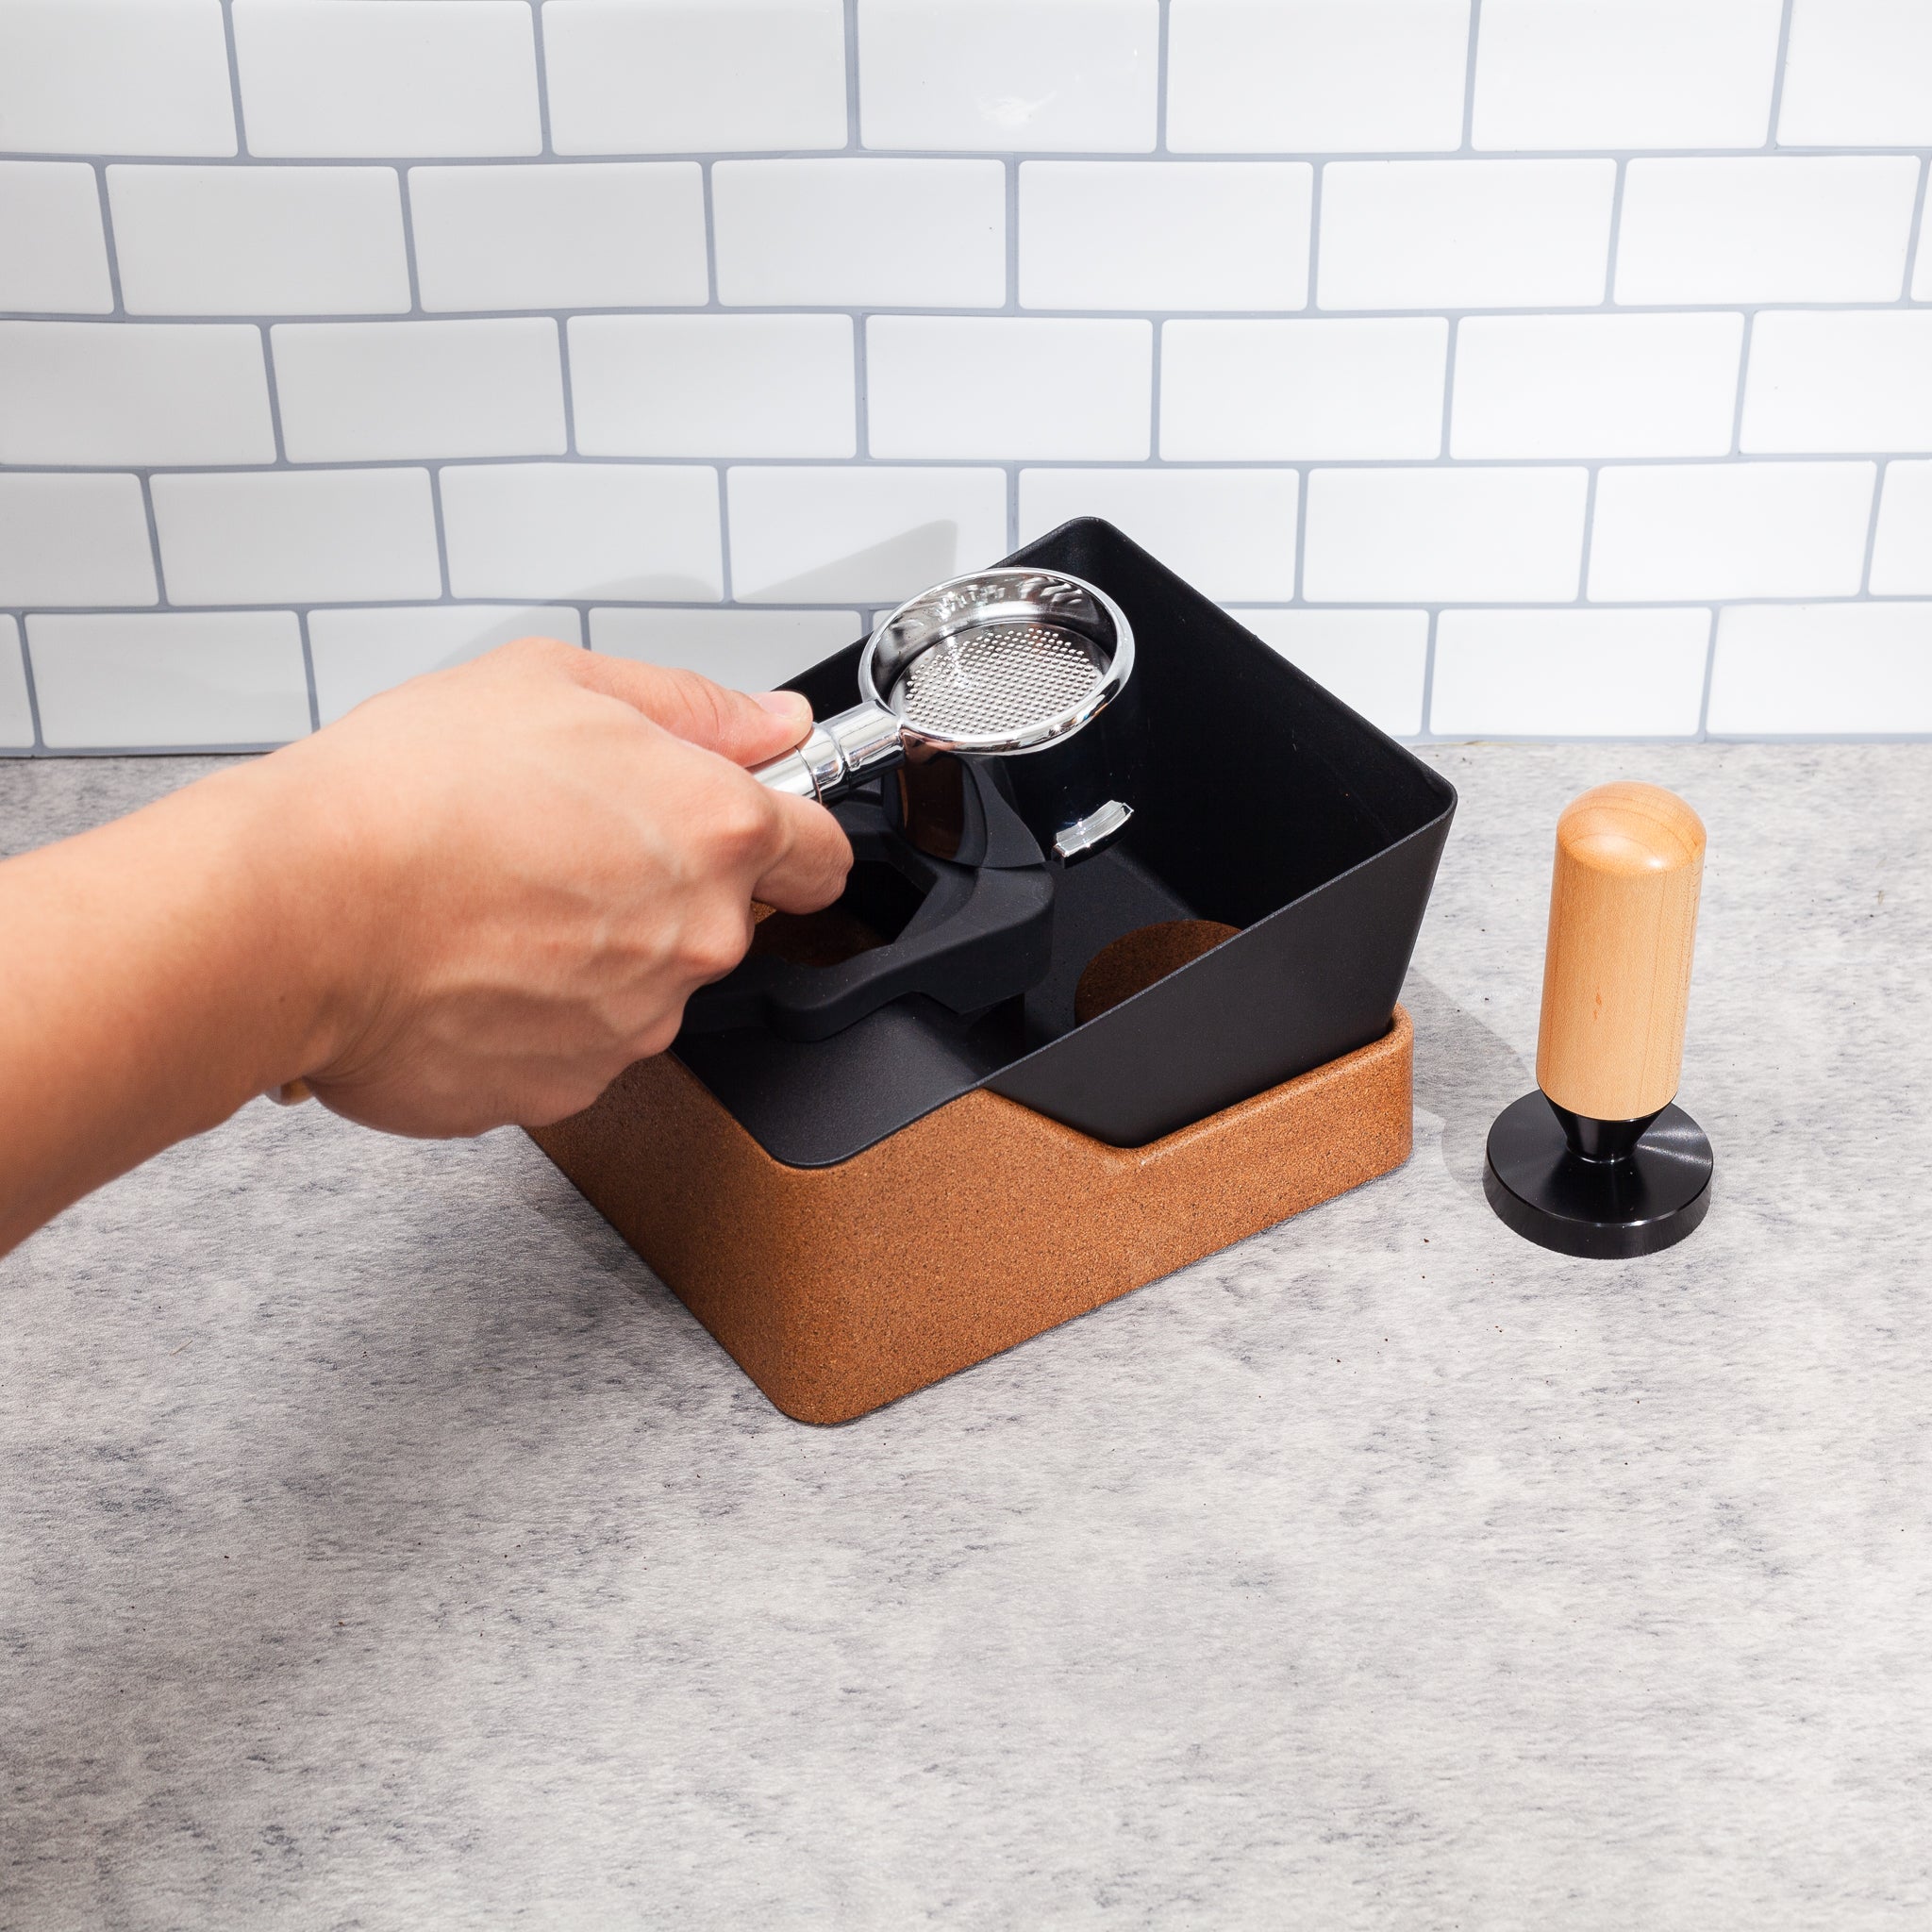 A Knock Box + Tamping Station All-In-One